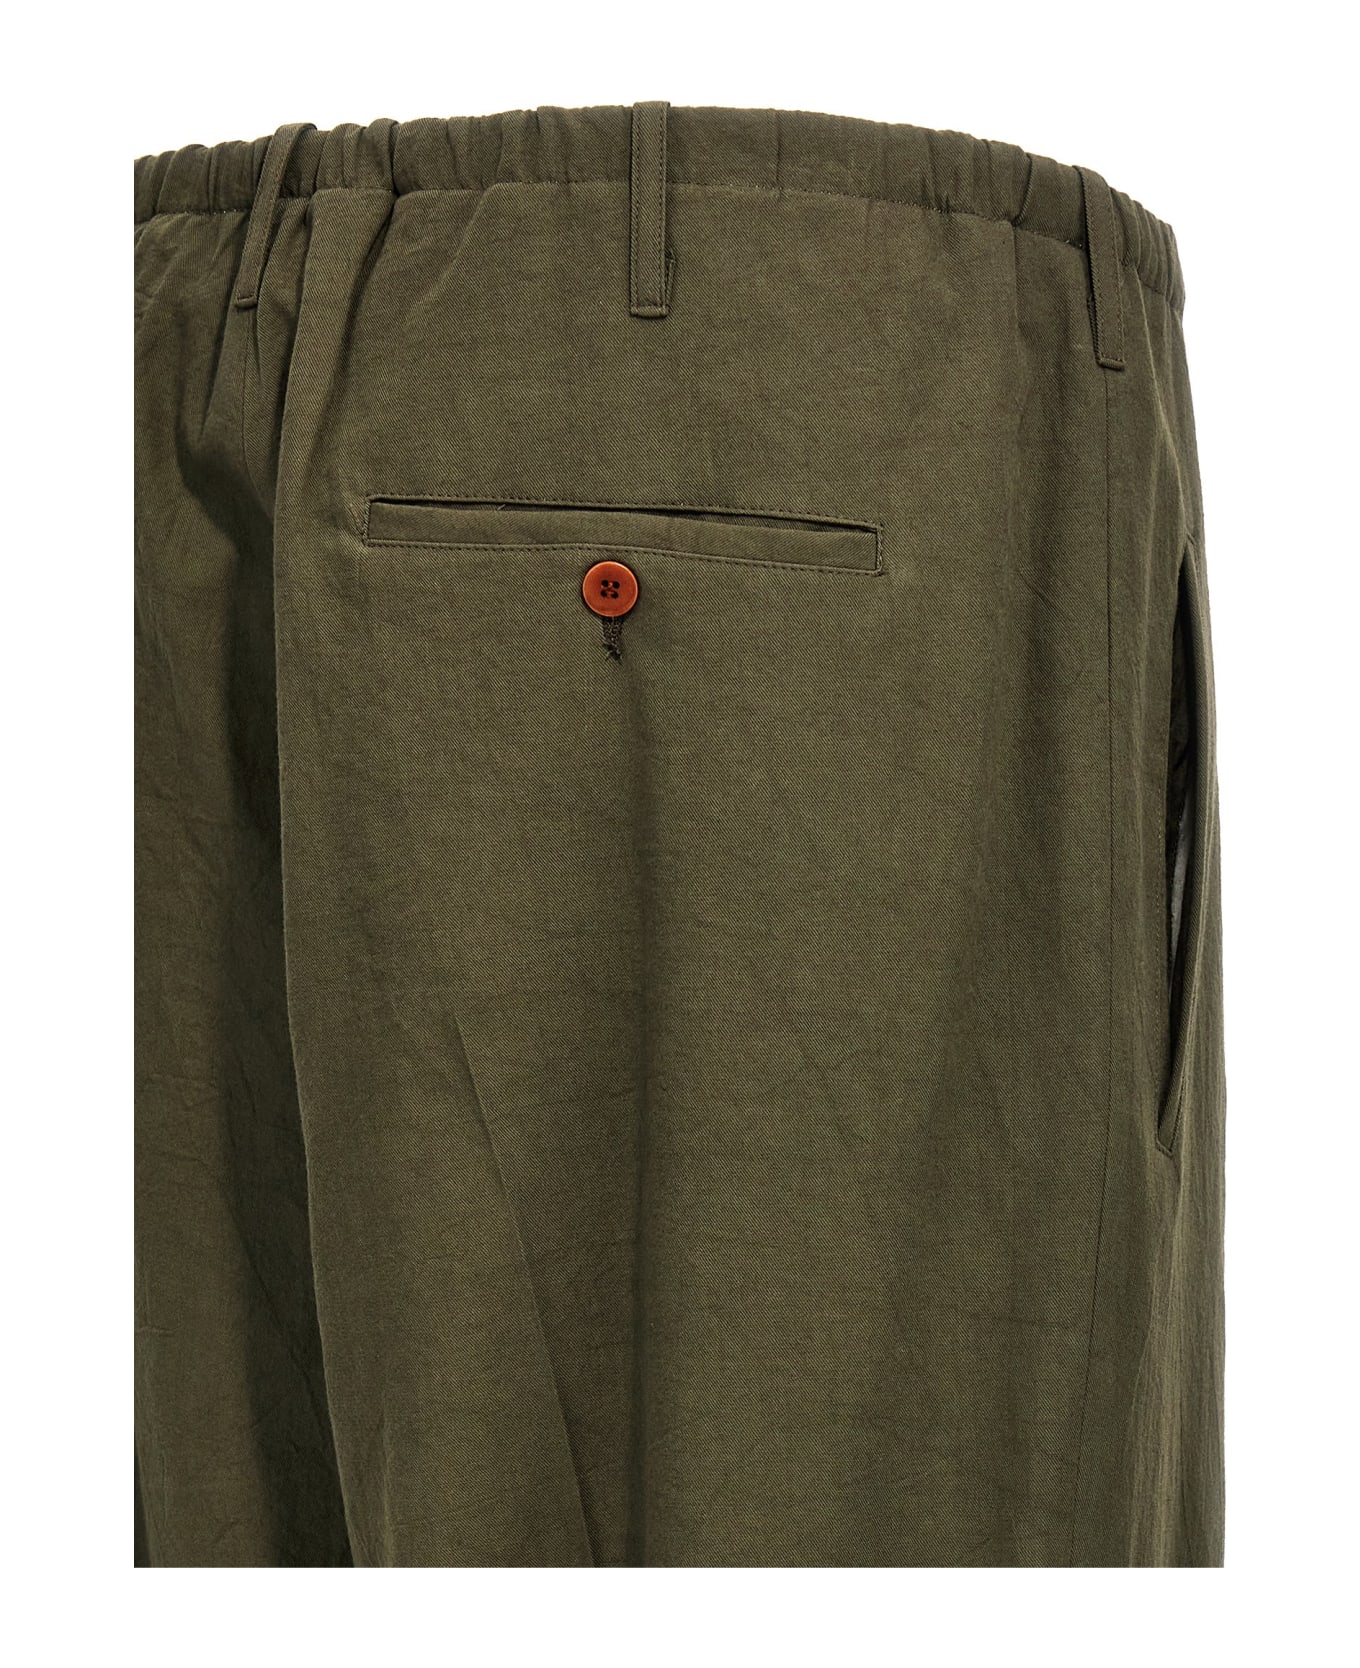 Magliano 'new People's' Pants - Green ボトムス